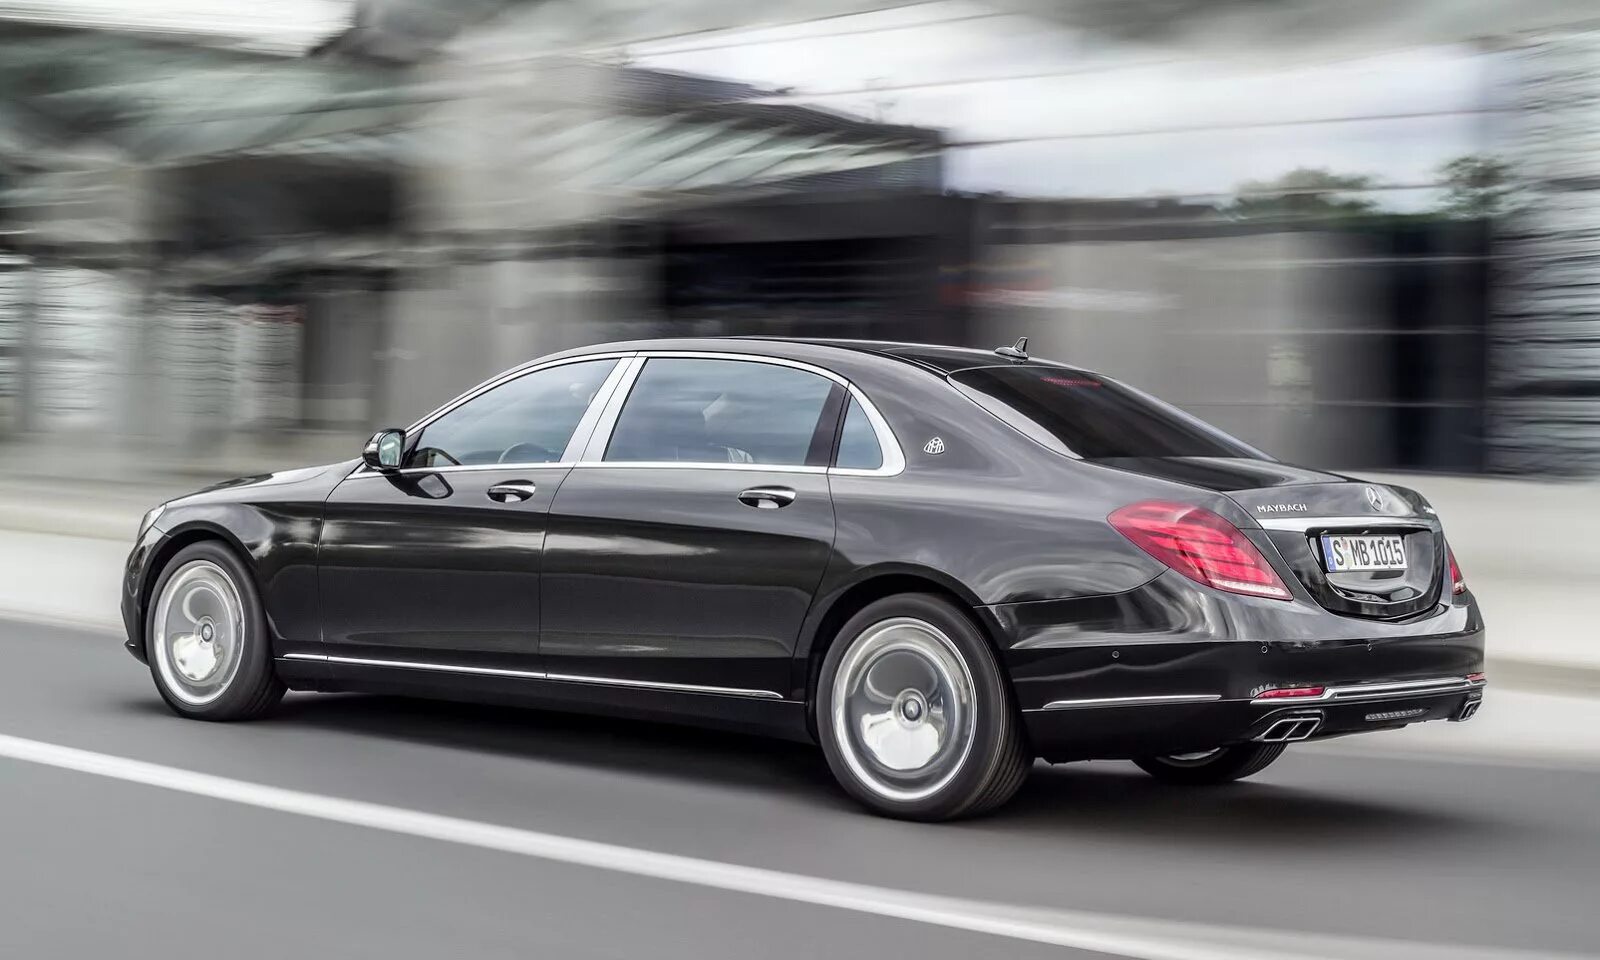 Mercedes-Benz x222 s600 Maybach. Мерседес Майбах 600. Мерседес s600 222. Мерседес Майбах s класс.